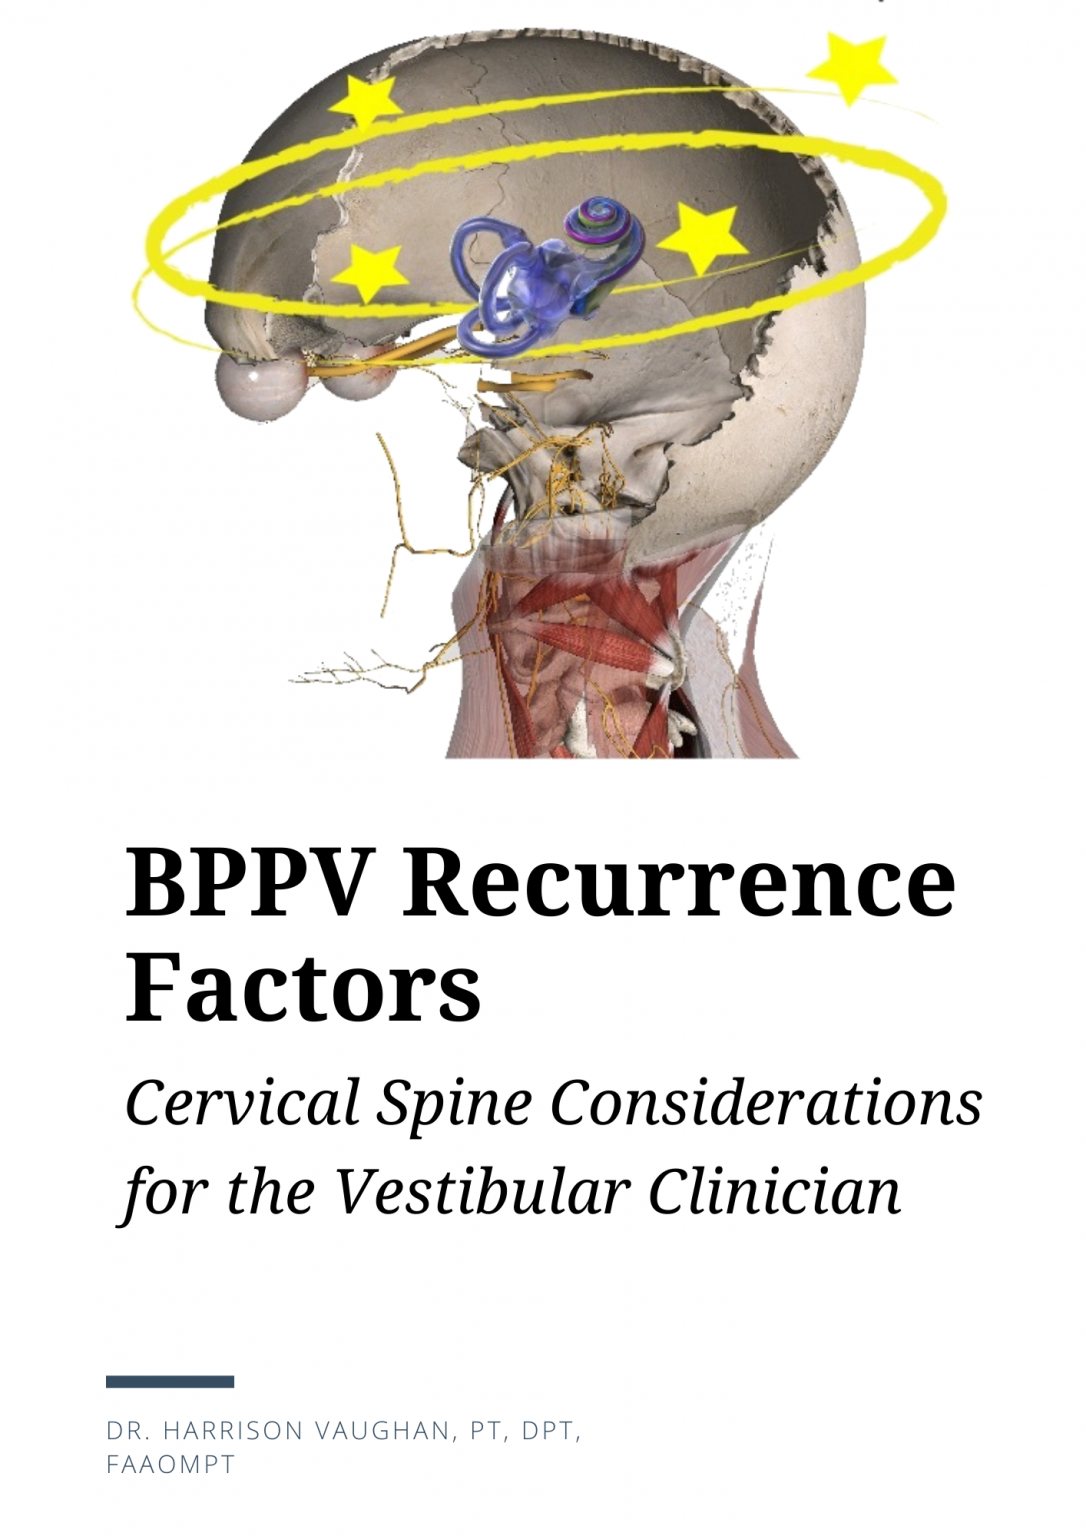 Recurrence-Factors-for-BPPV-1086×1536